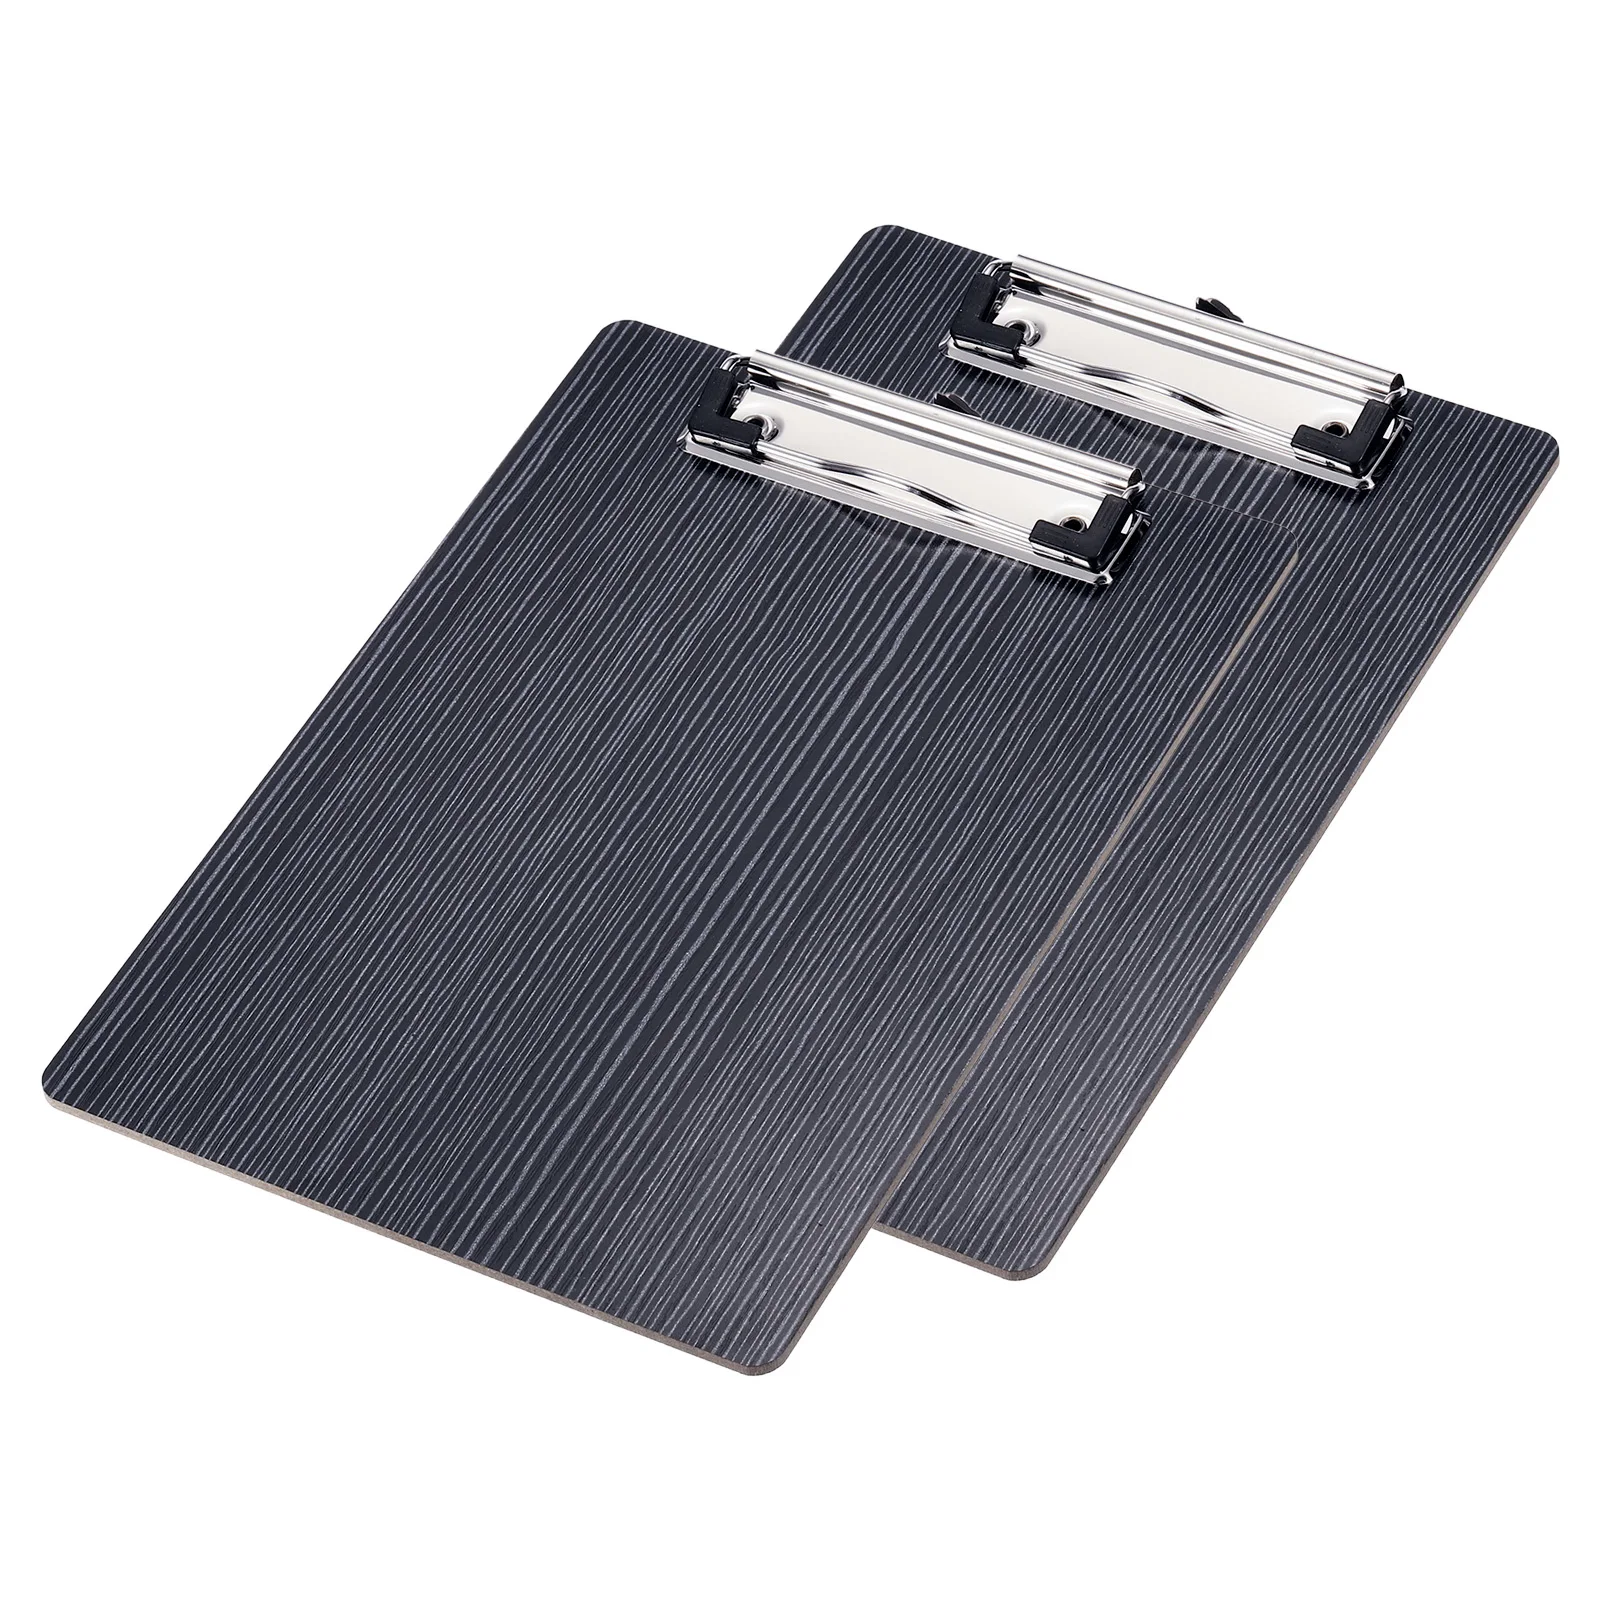 

2Pcs File Folder Clipboards Hardboard with Low Profile Clip 6.3x9.1 Inch A5 Letter Size Wooden Writing Pad Black Wood Texture